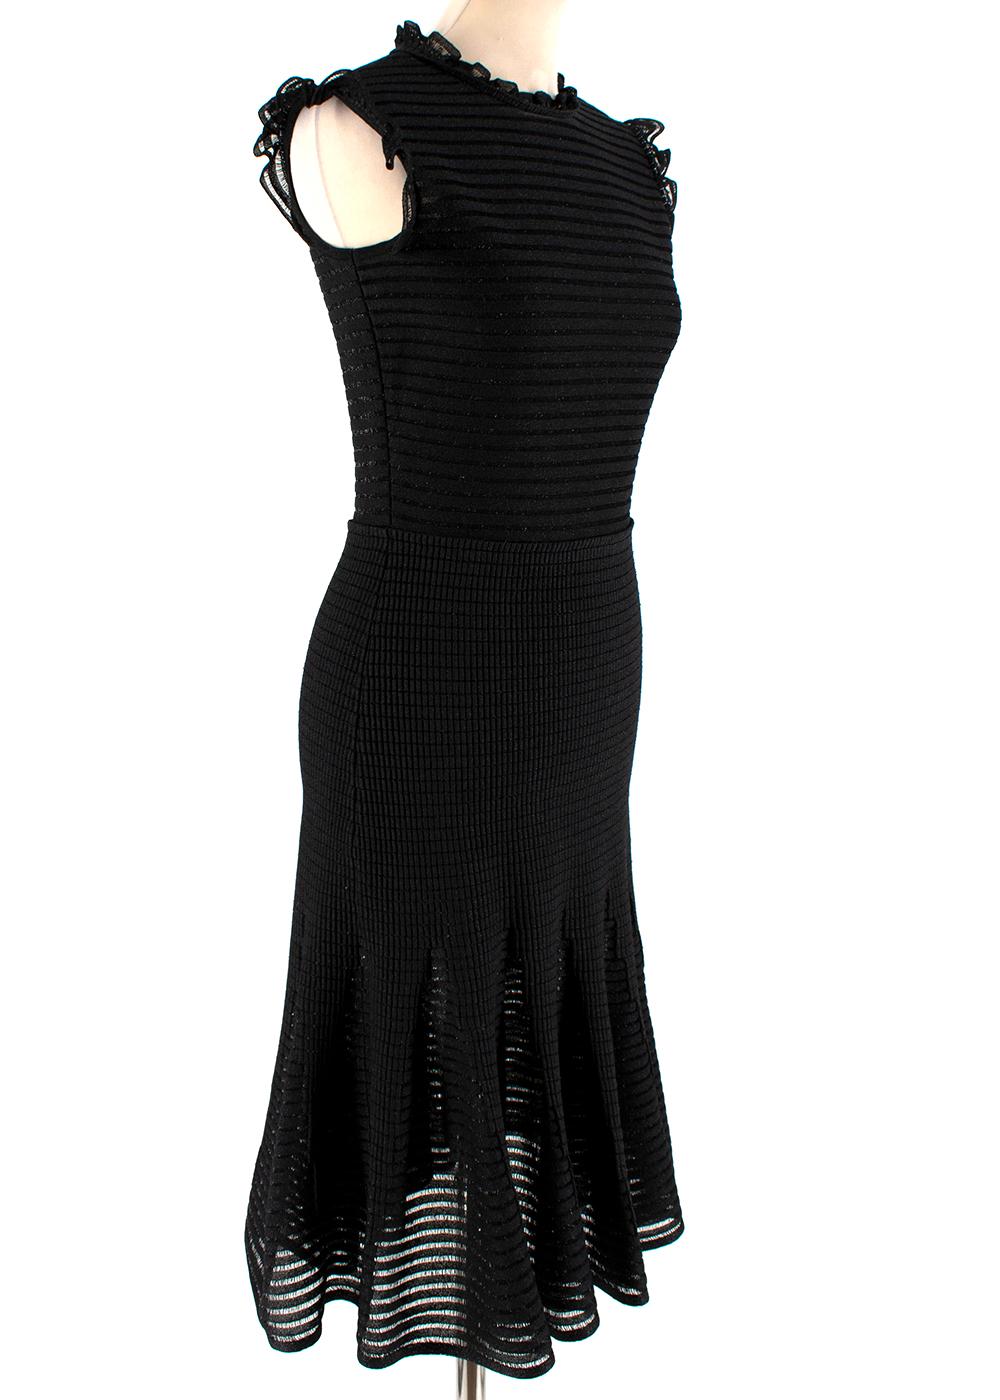 Alexander Mcqueen Ruffle Neck and Sleeve Sheer Knit Dress - Size Small ...